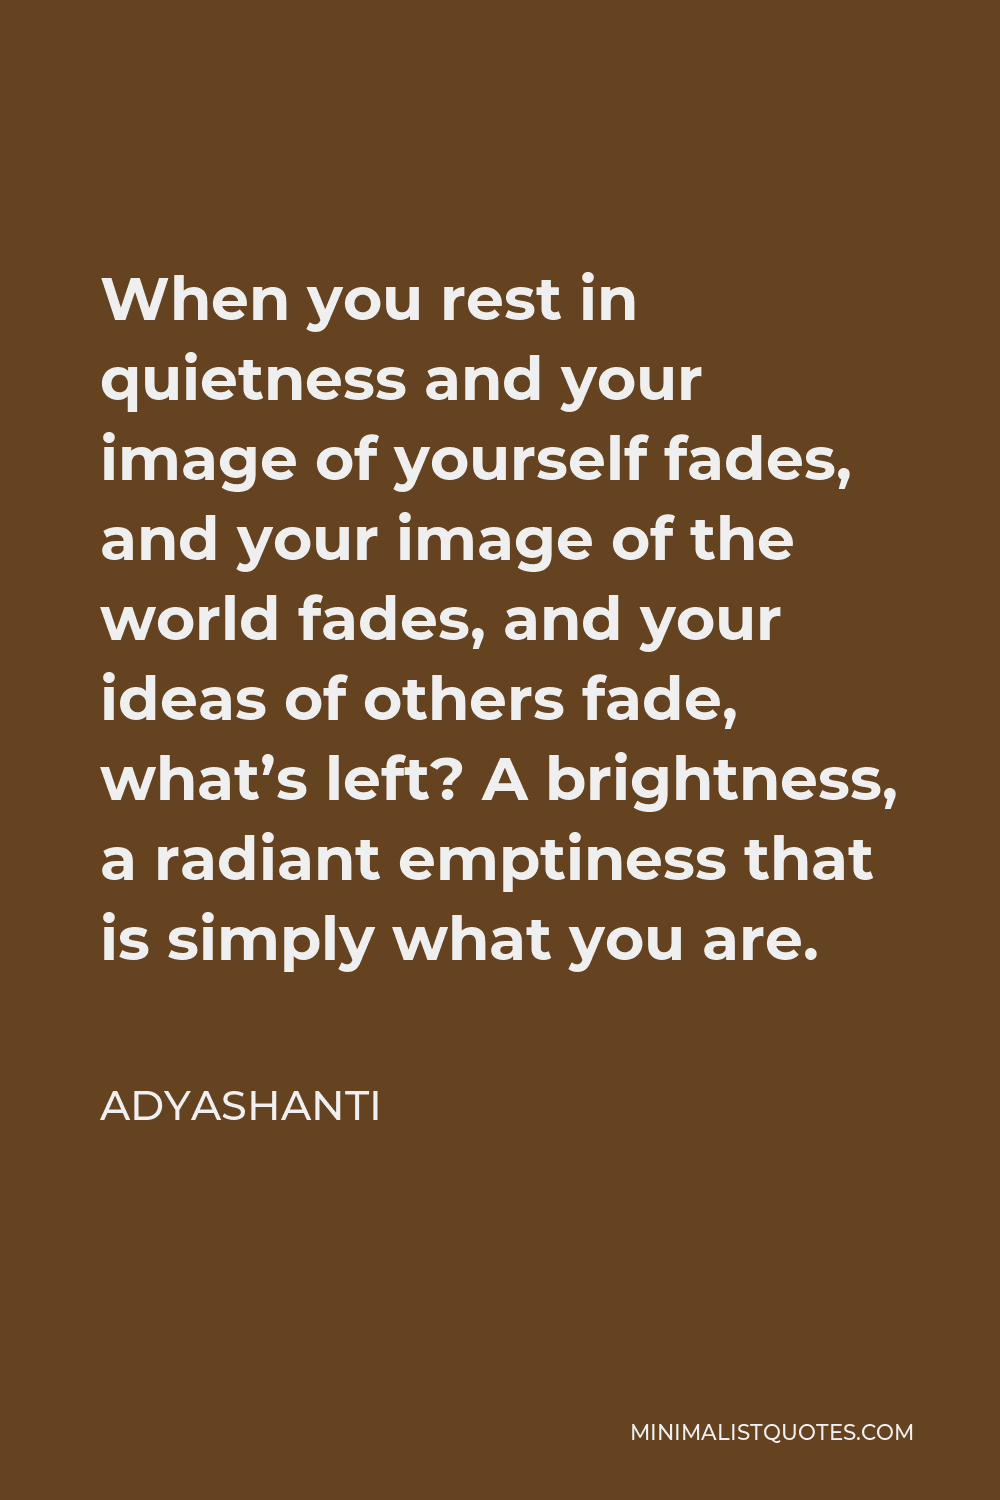 Adyashanti Quote - When you rest in quietness and your image of yourself fades, and your image of the world fades, and your ideas of others fade, what’s left? A brightness, a radiant emptiness that is simply what you are.